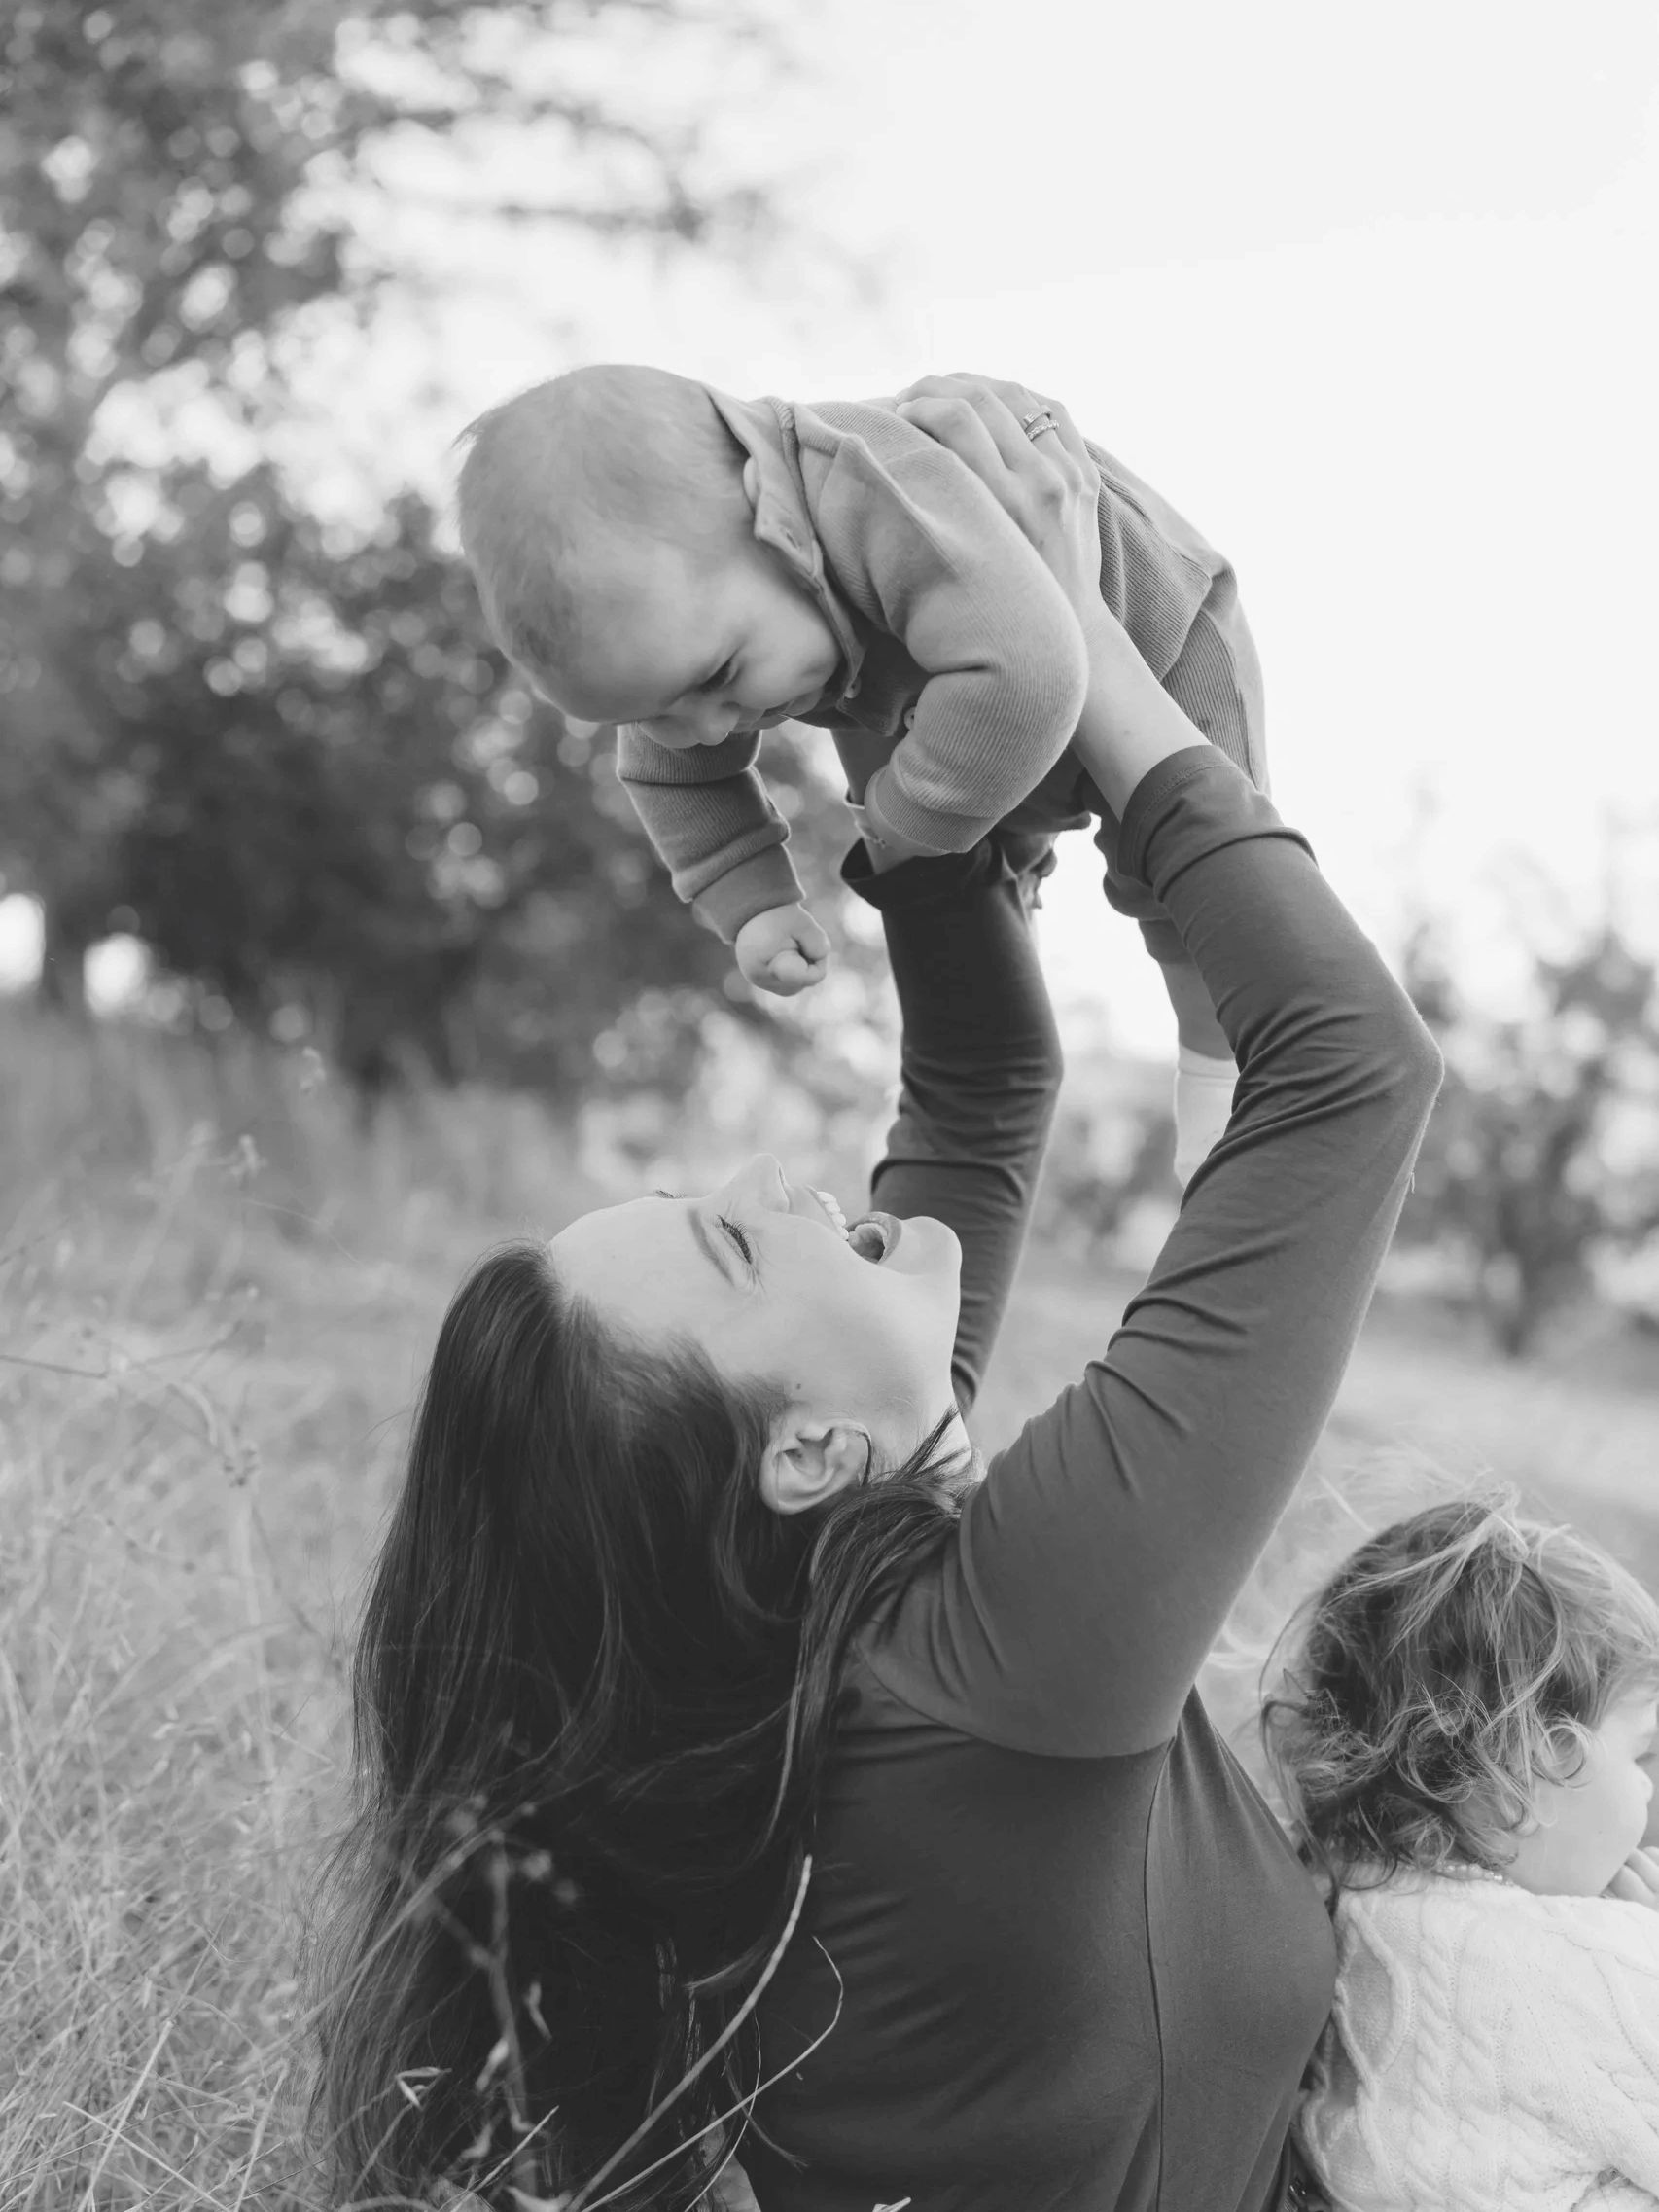 Mom holding baby up in the air with big smiles